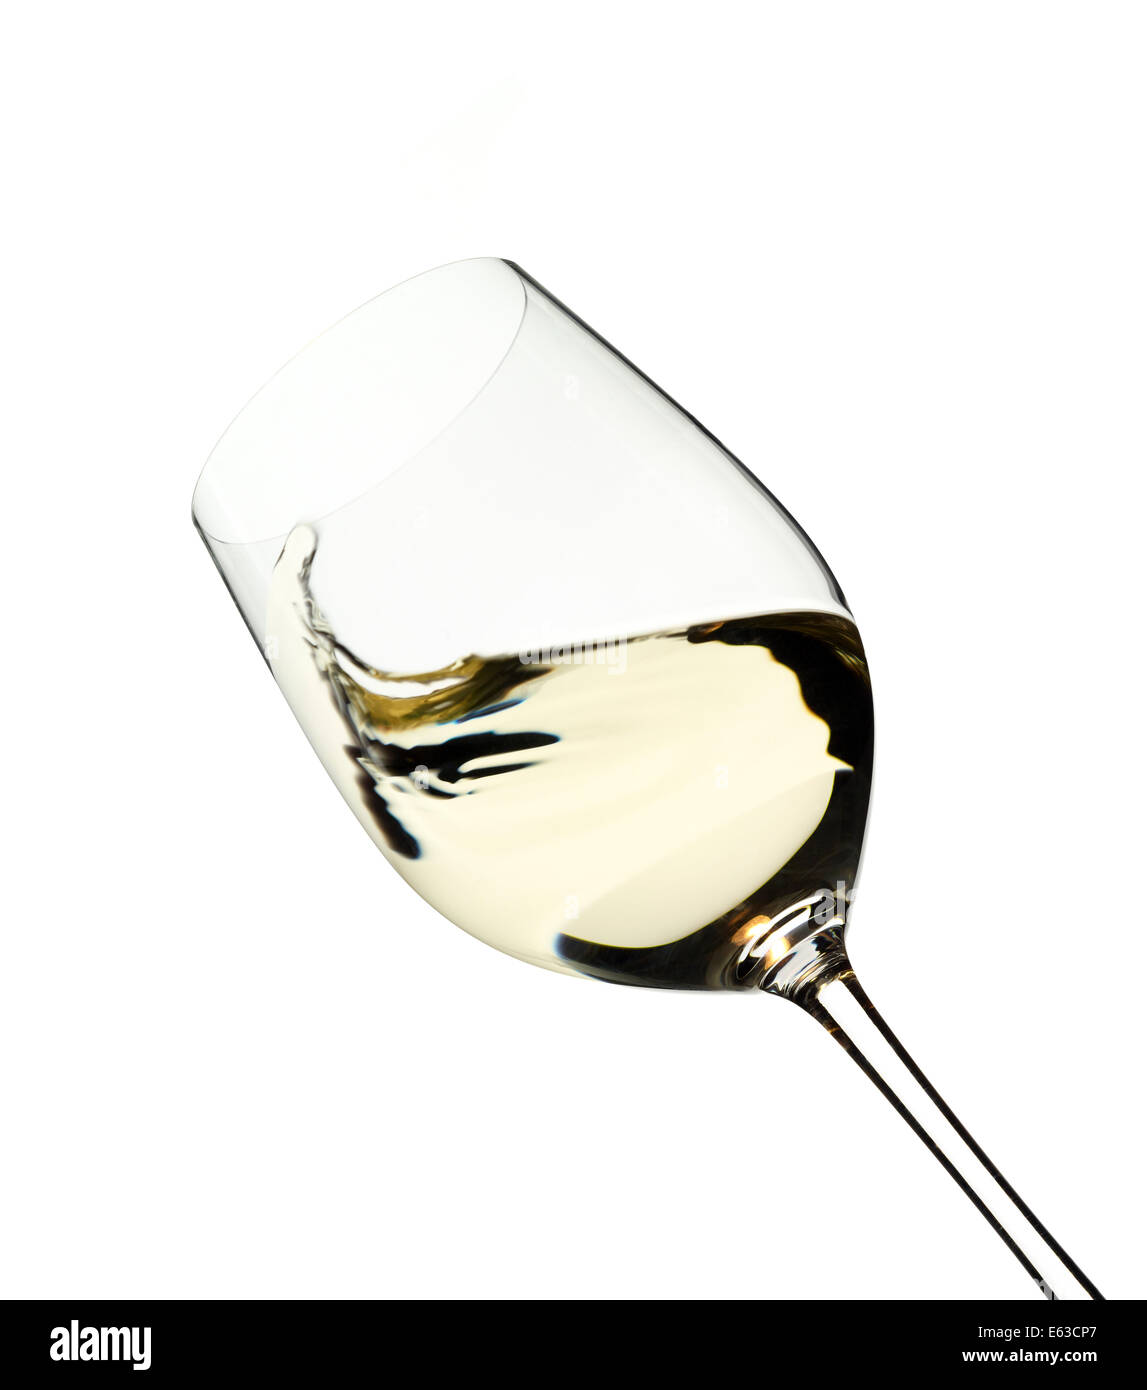 Swirl of white wine in a glass, on a pure white backkground Stock Photo